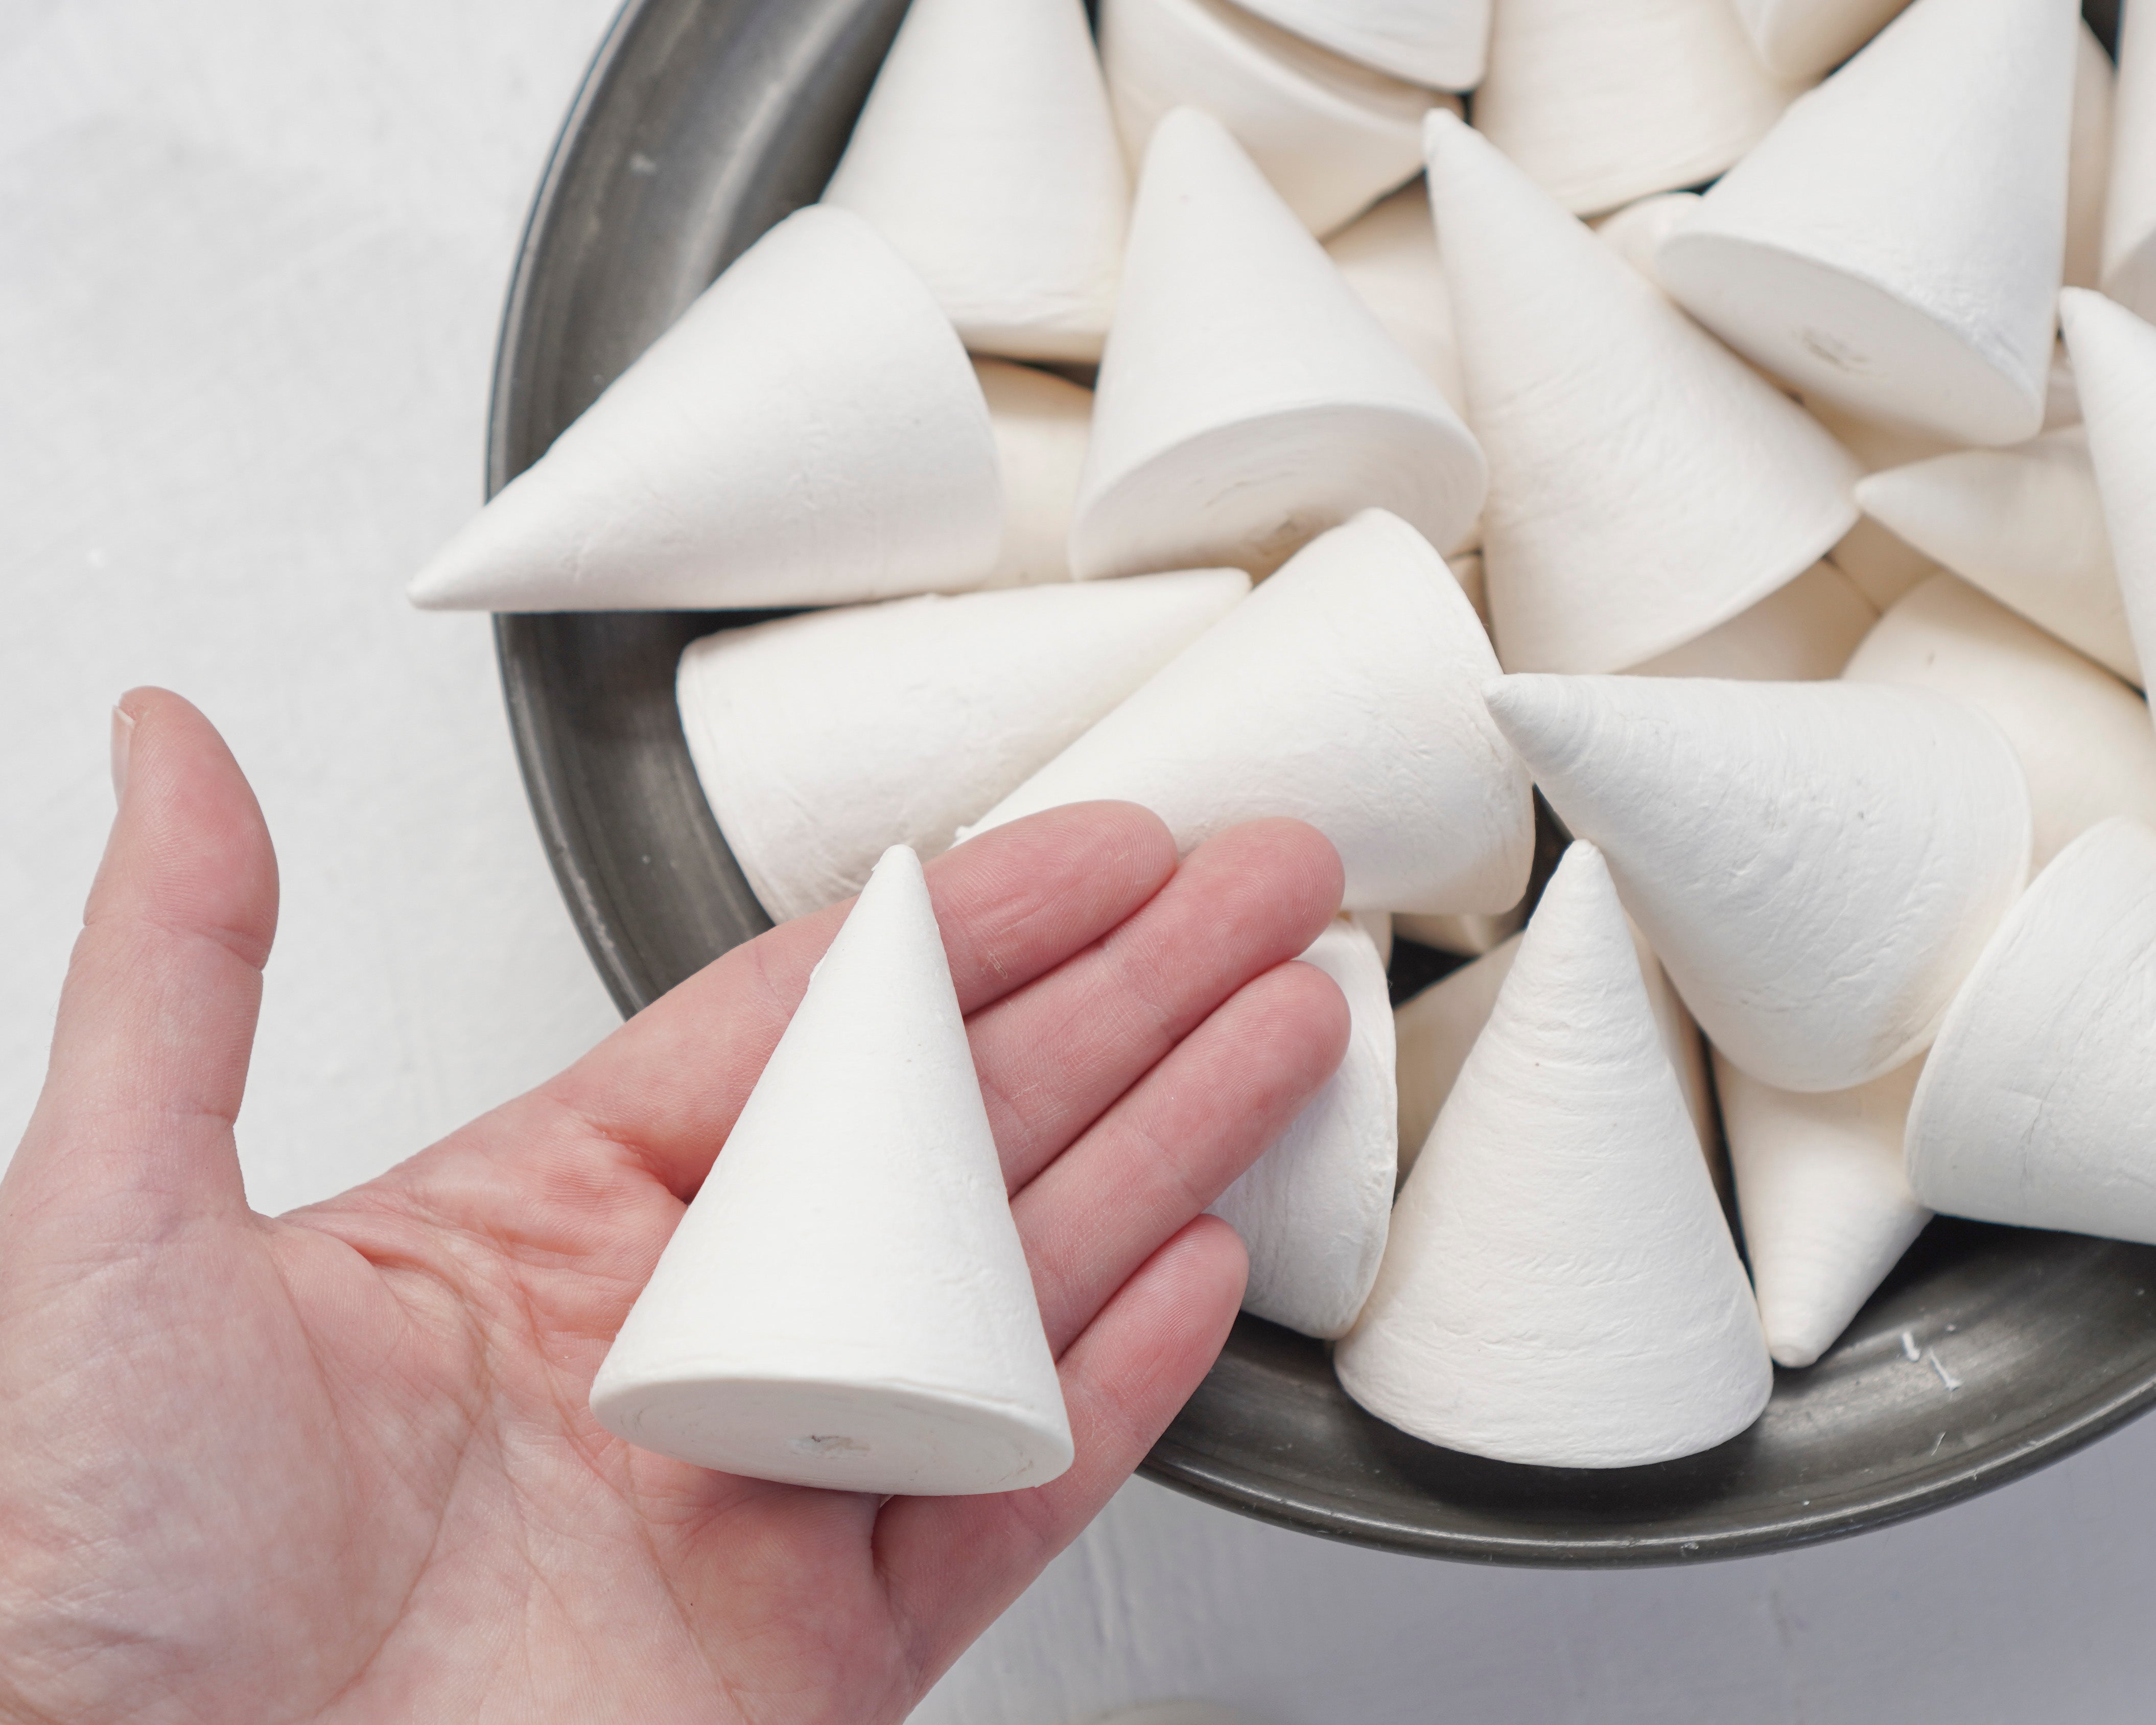 Pointy Spun Cotton Cones, 60 x 45mm Cone Craft Shapes, 6 Pcs.